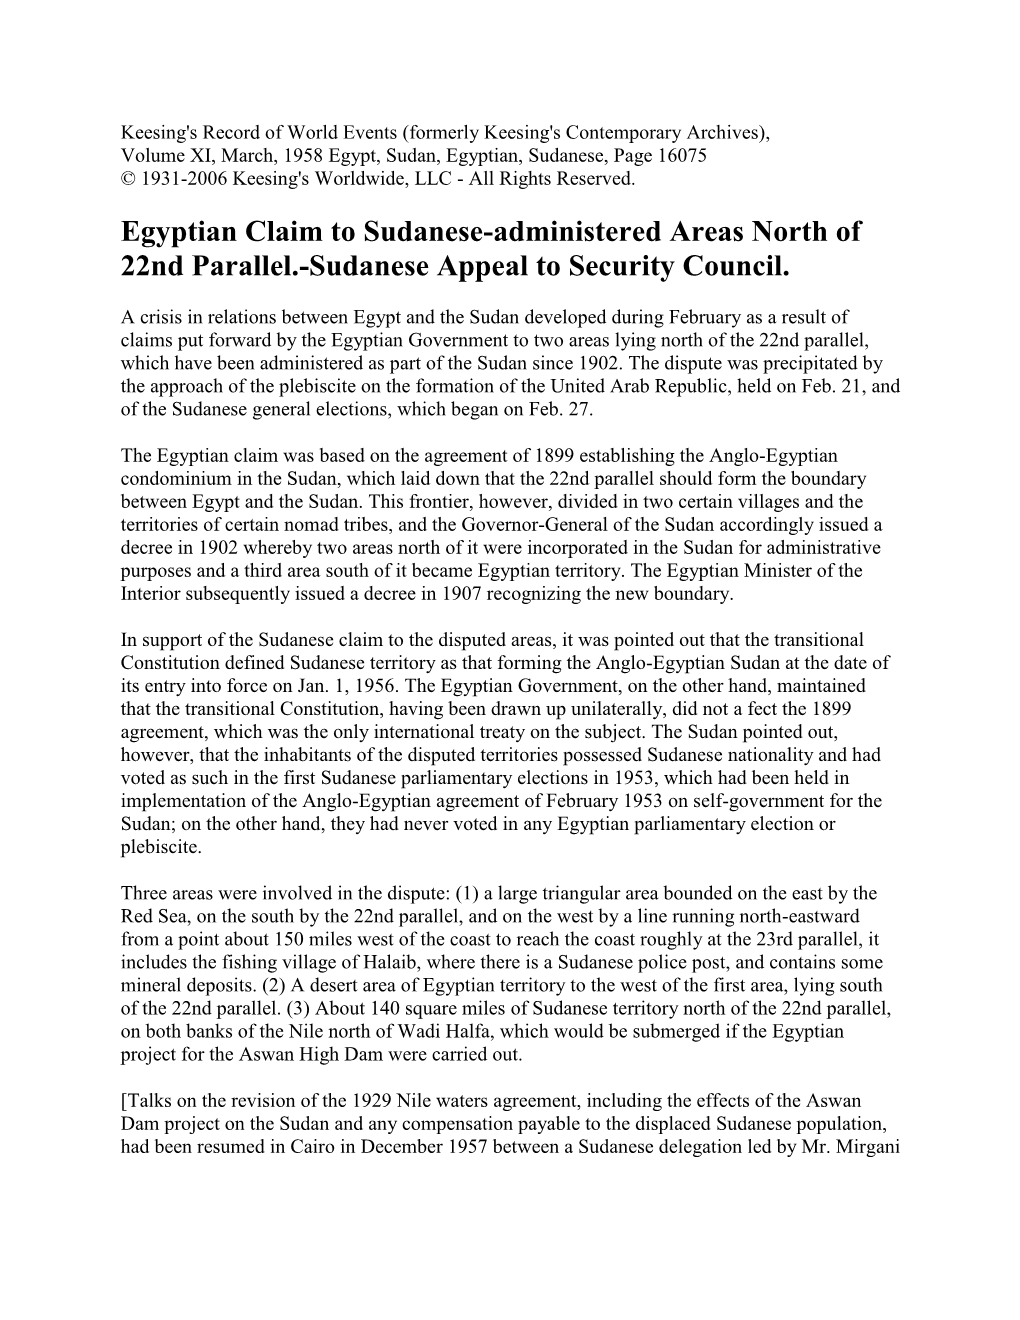 Egyptian Claim to Sudanese-Administered Areas North of 22Nd Parallel.-Sudanese Appeal to Security Council